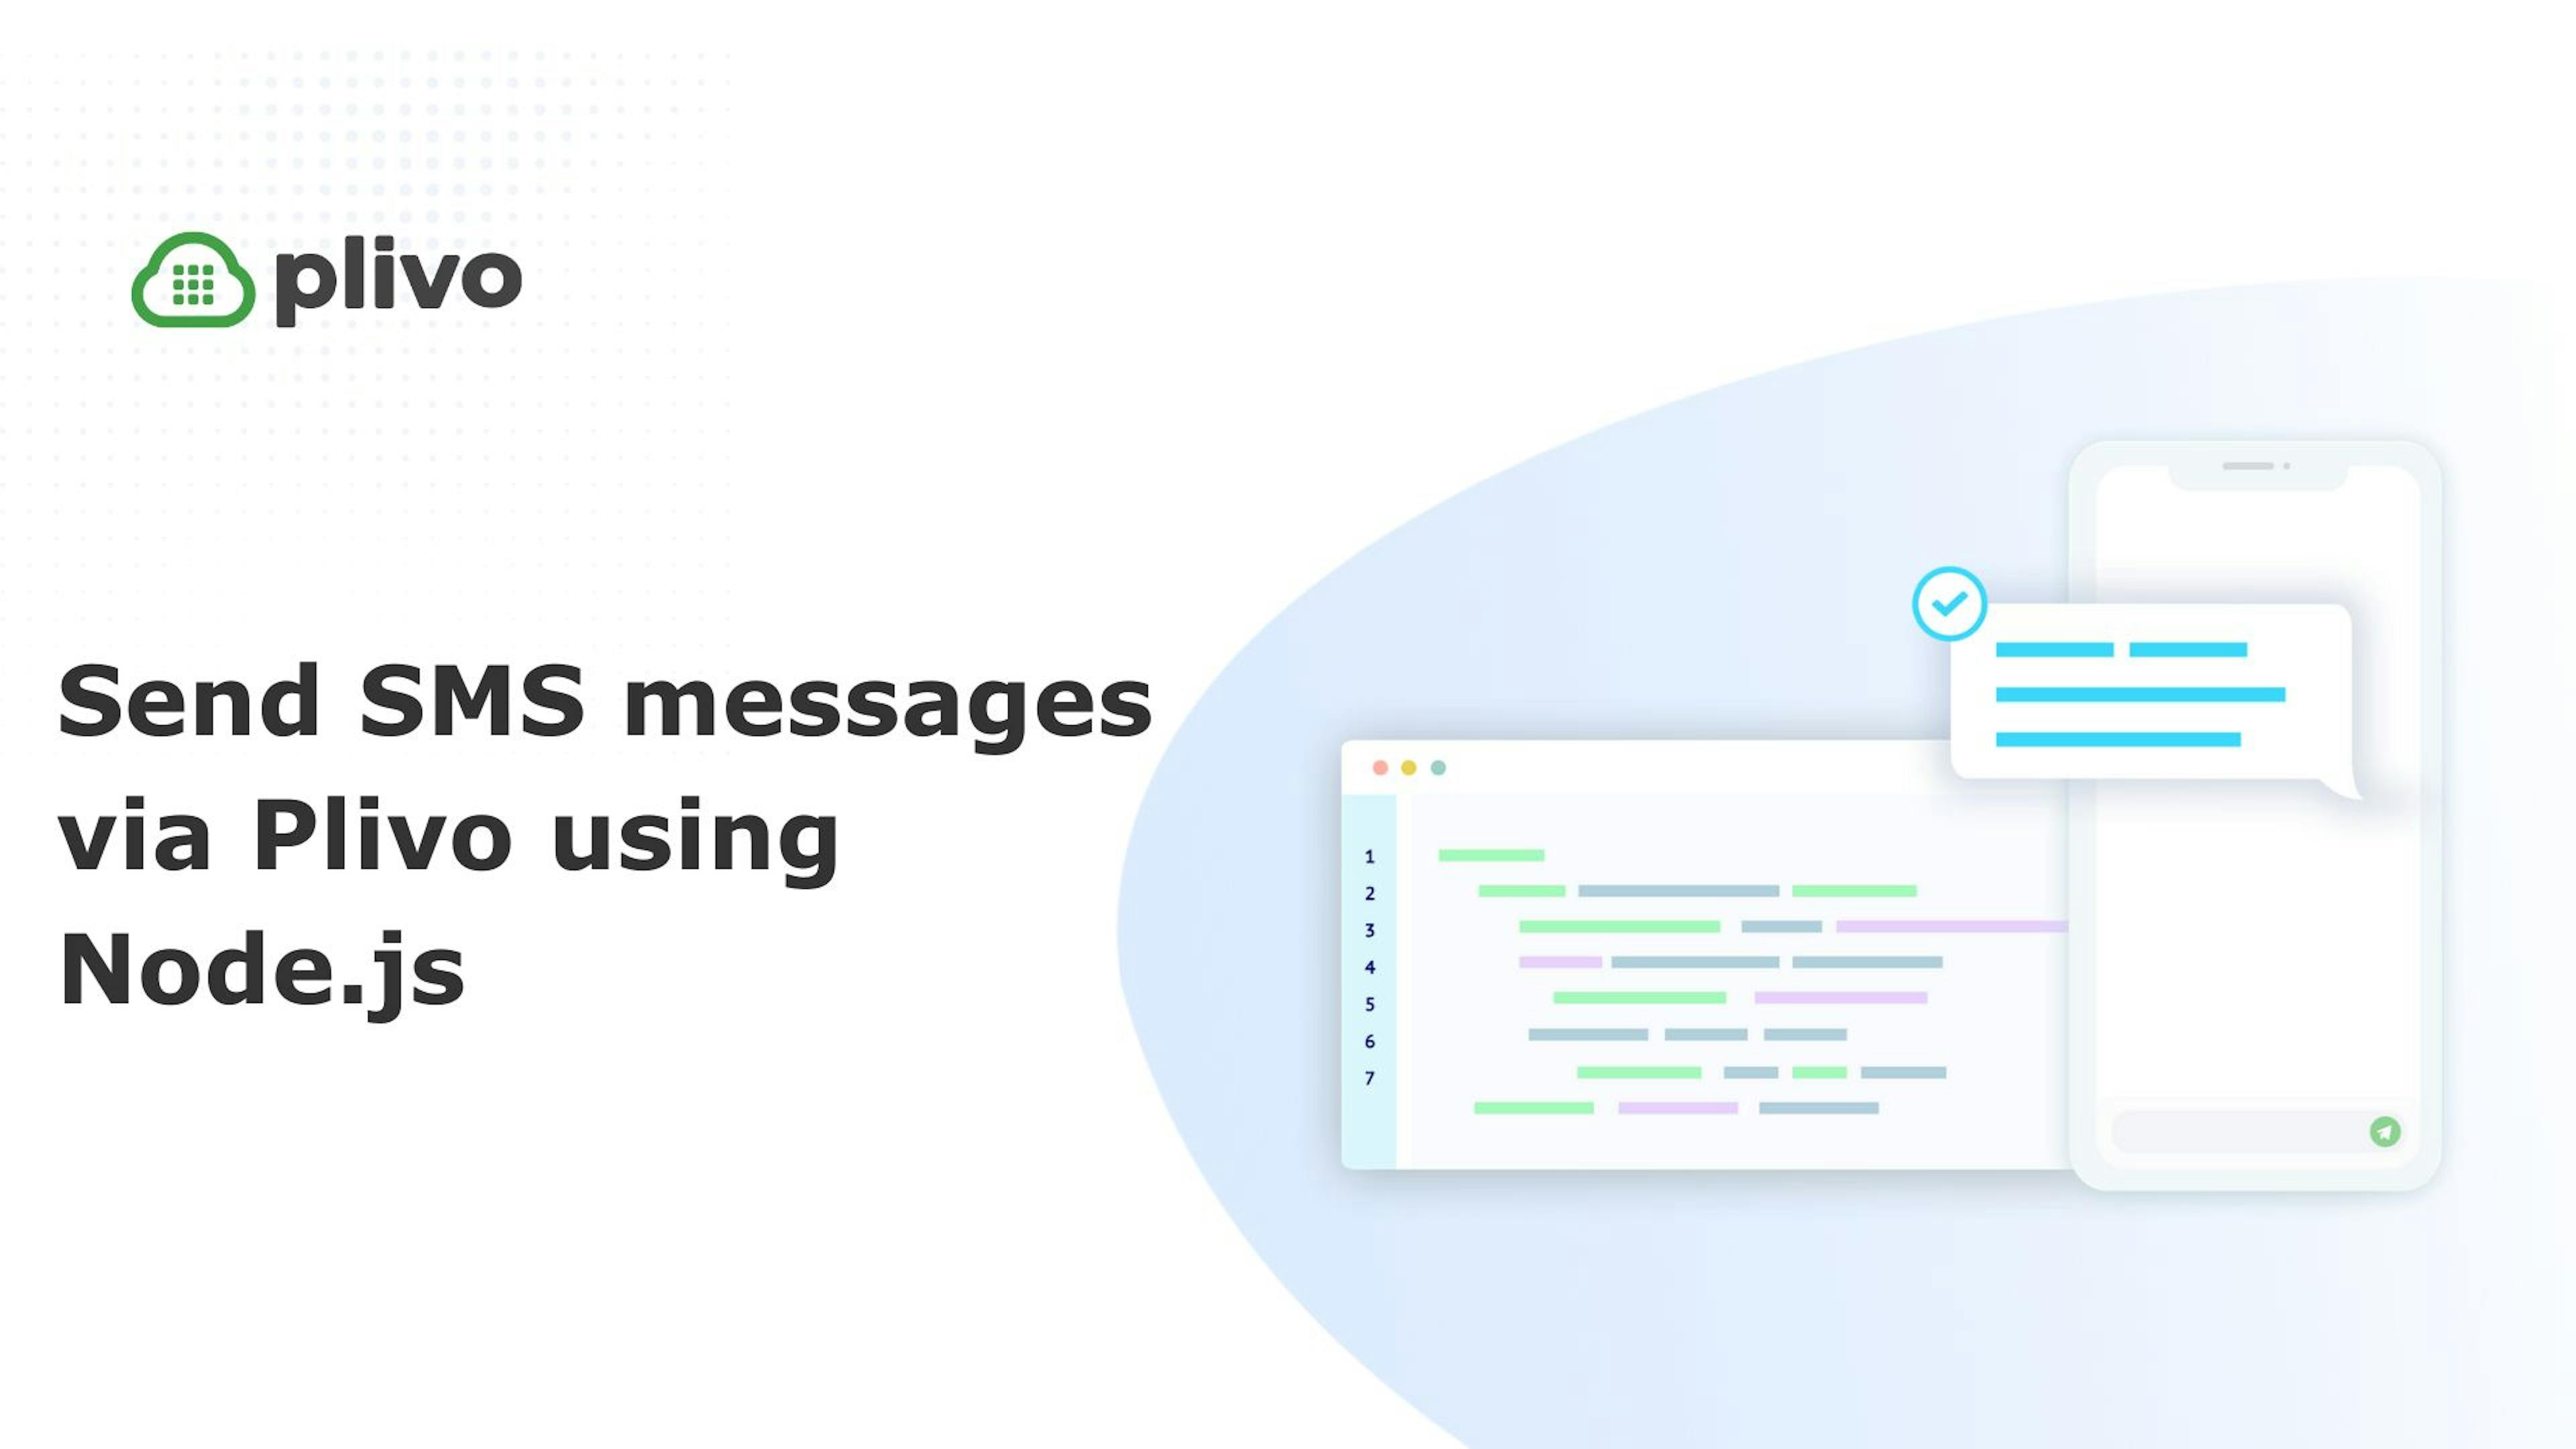 /using-plivo-apis-for-sending-sms-messages-with-nodejs-eul33u5 feature image